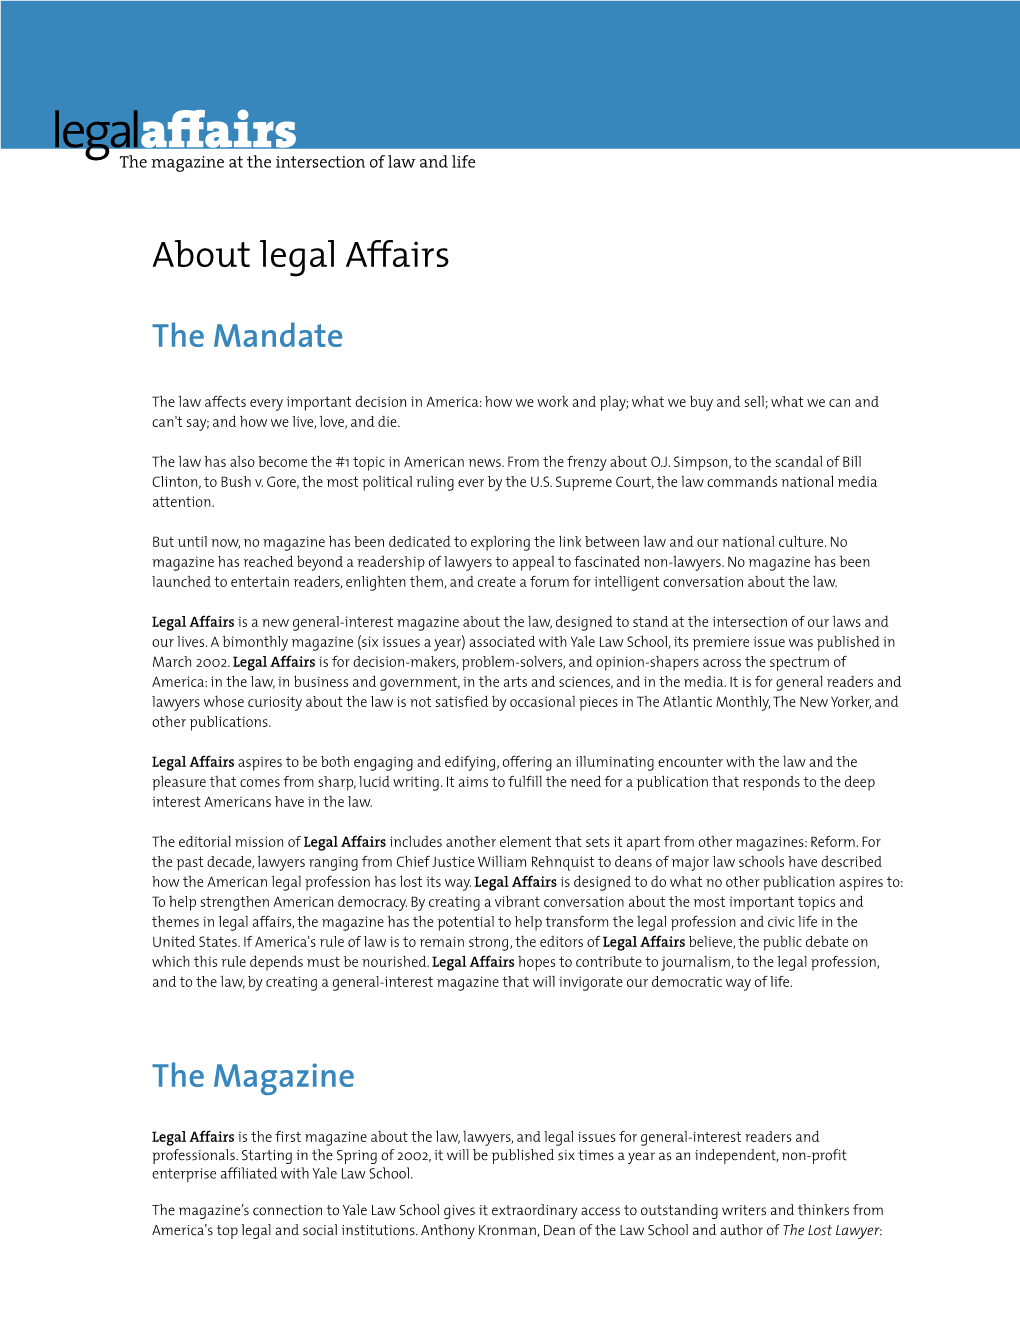 About Legal Affairs � the Mandate